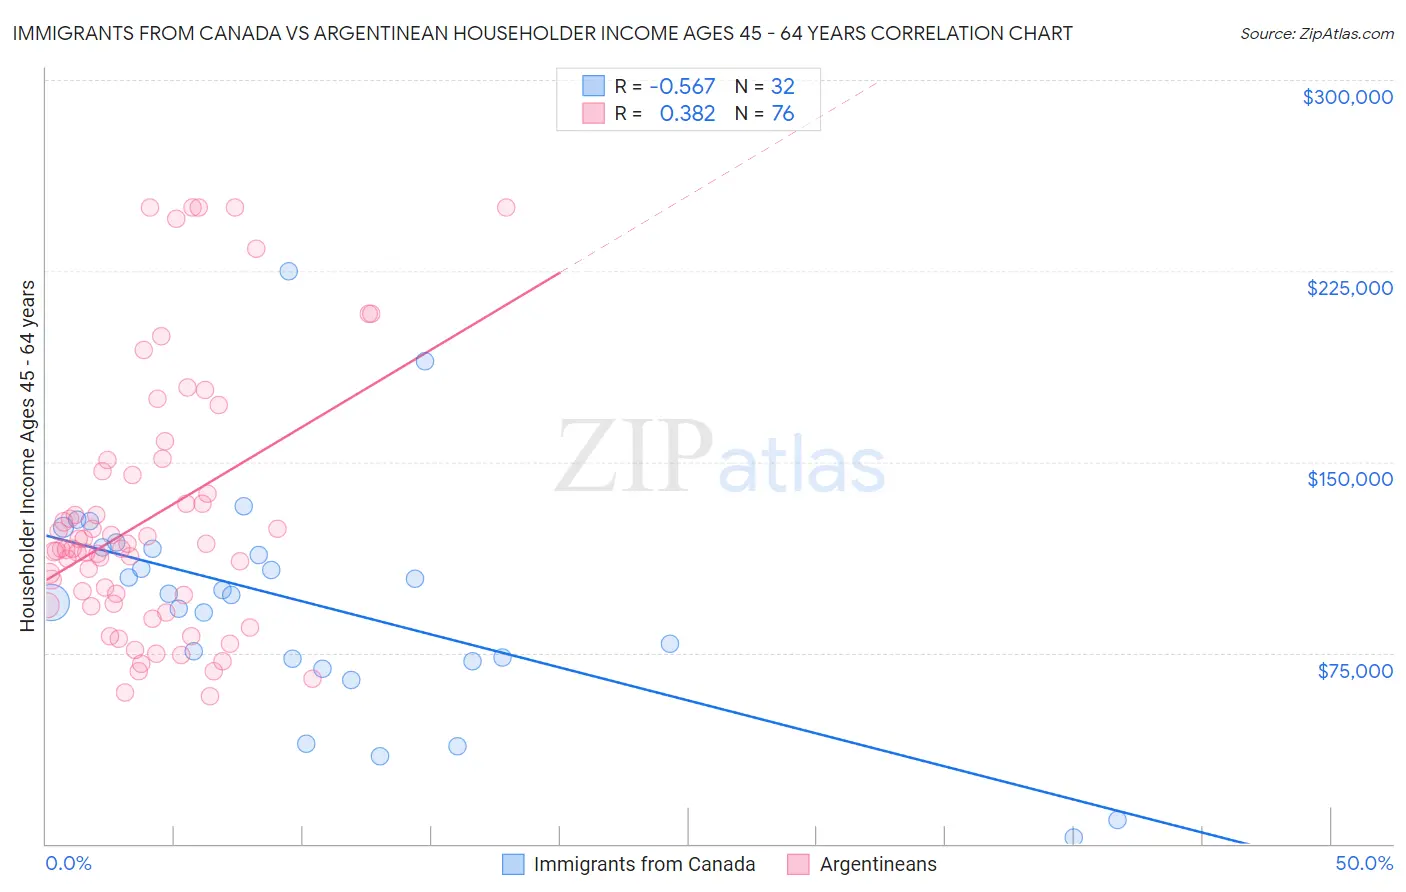 Immigrants from Canada vs Argentinean Householder Income Ages 45 - 64 years